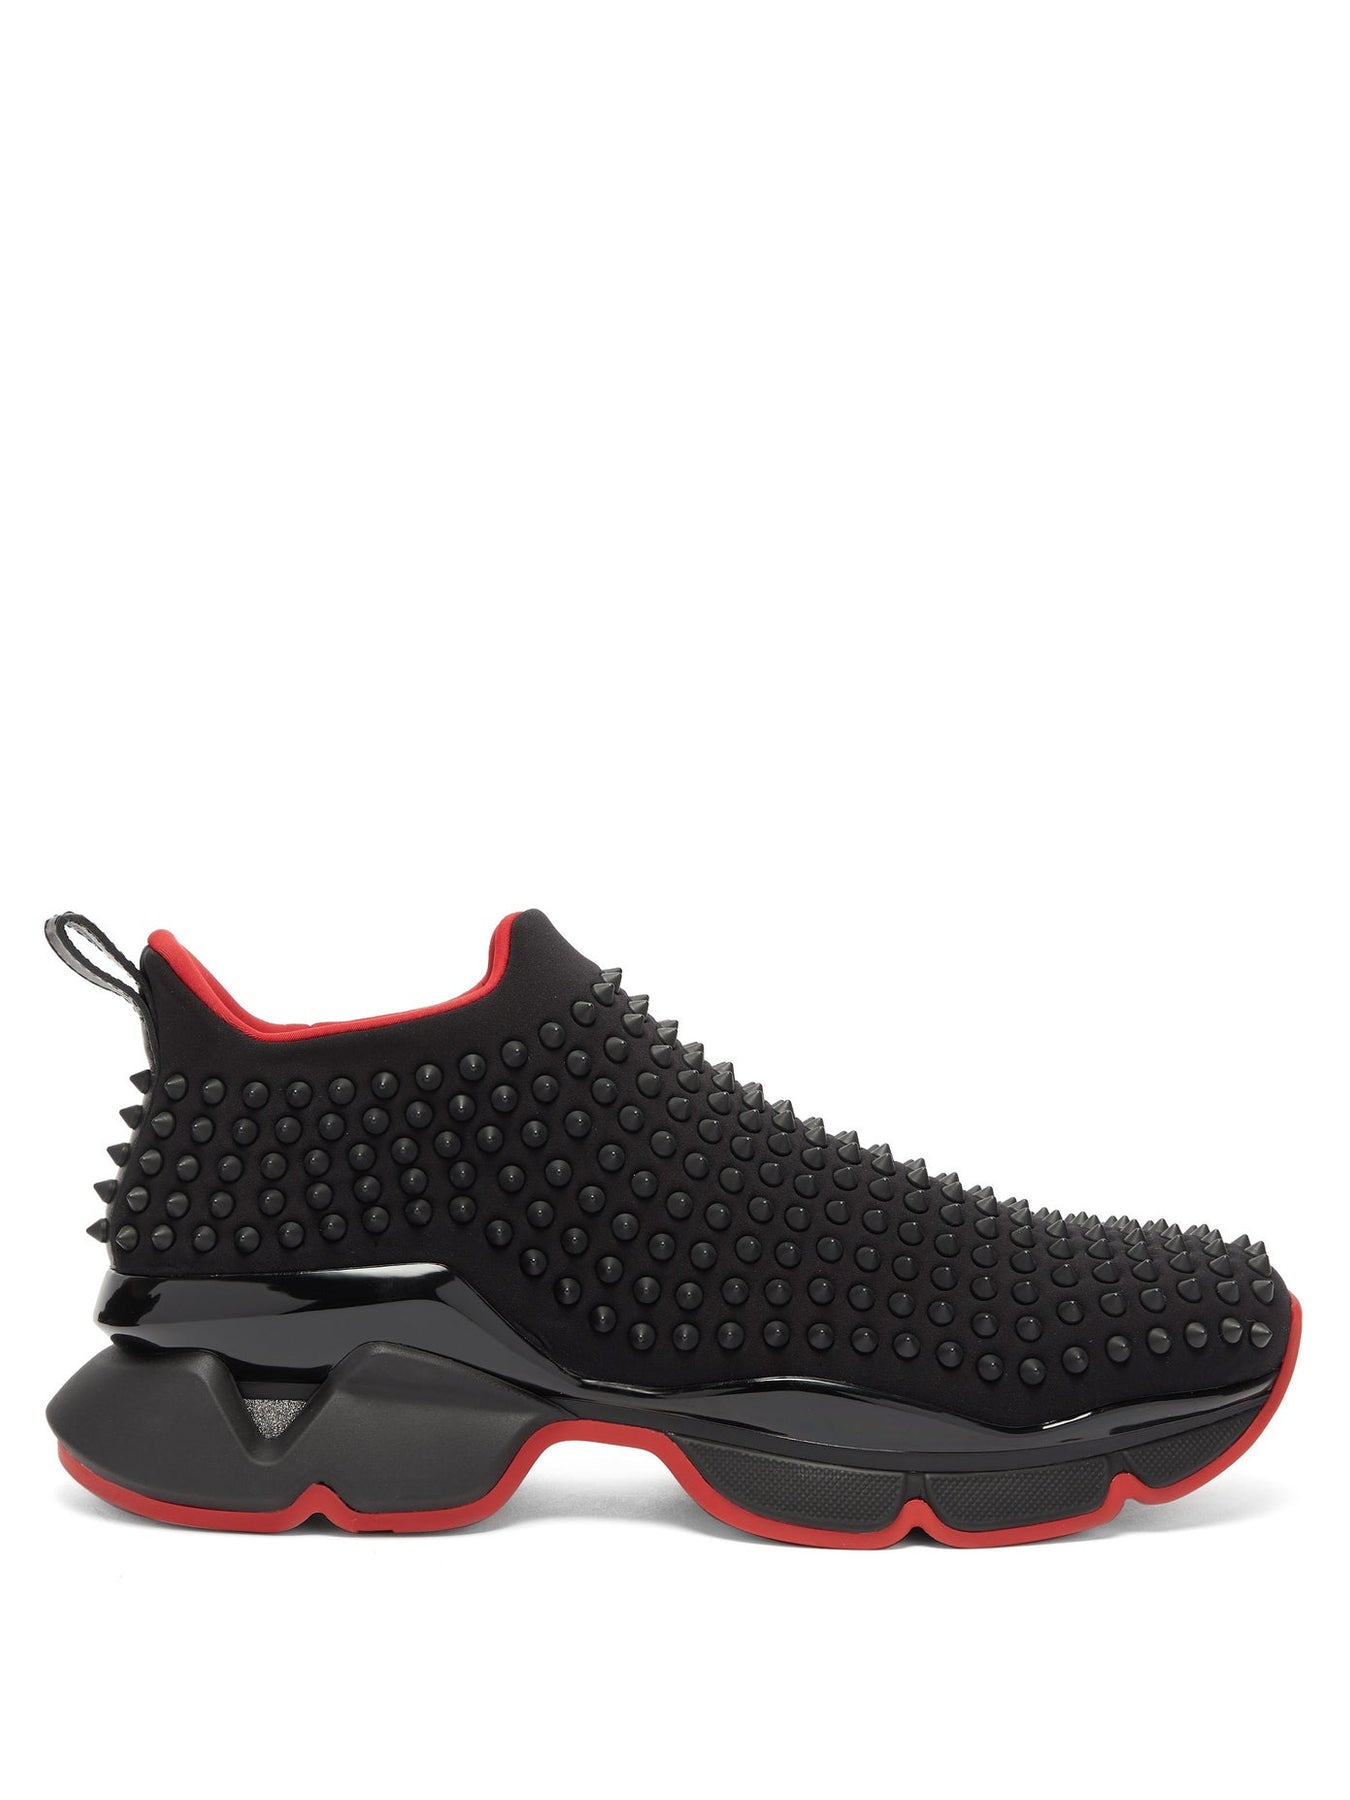 Buy Christian Louboutin Spike Sock Shoes: New Releases & Iconic Styles